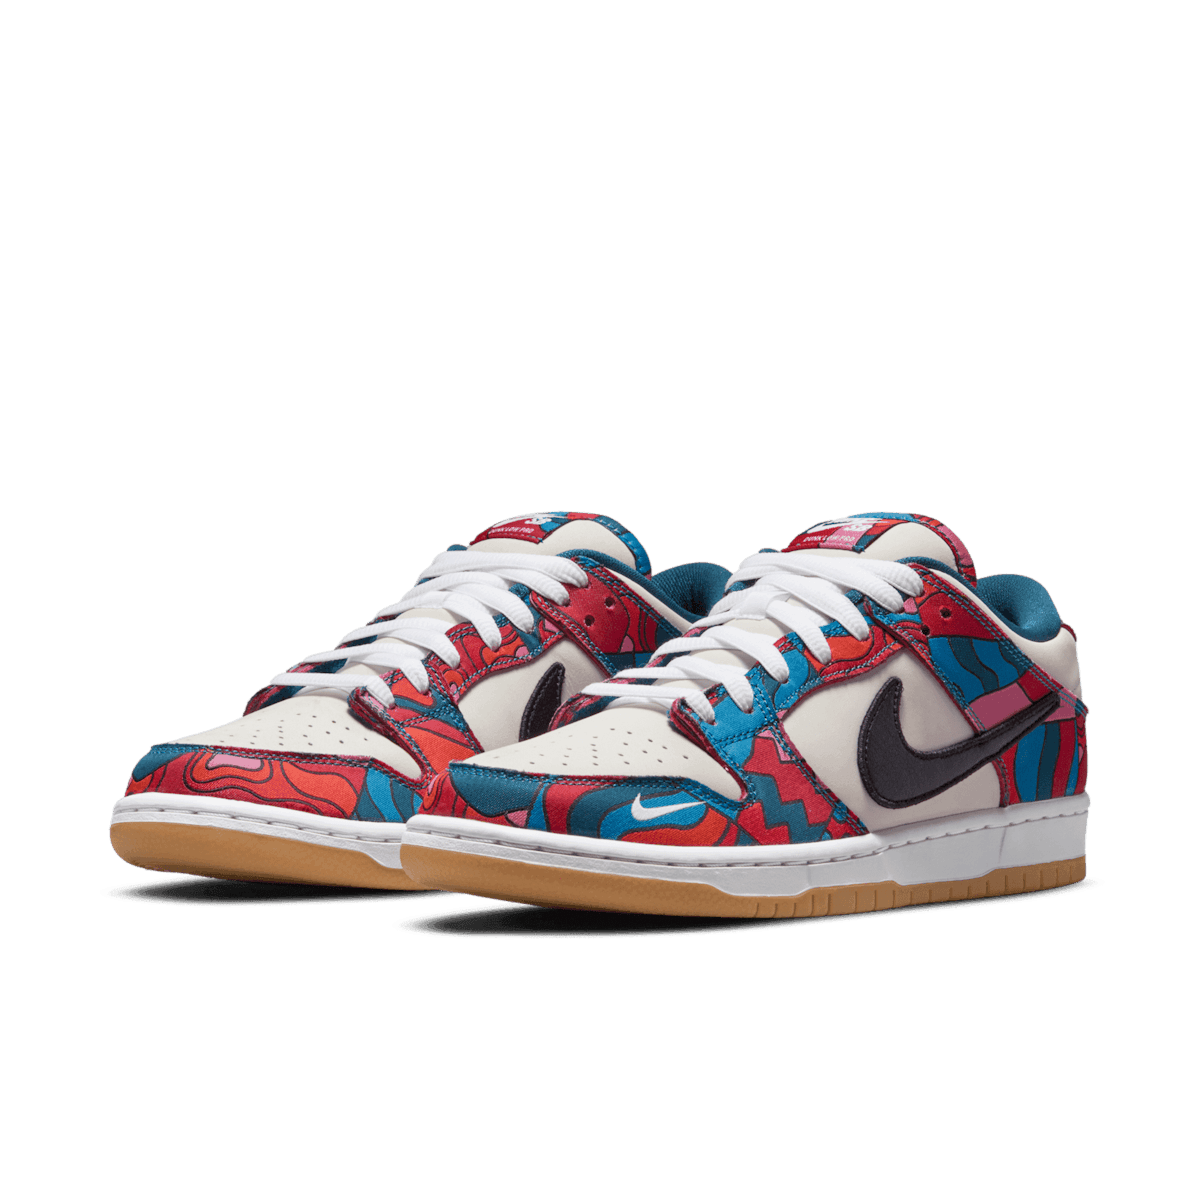 Nike SB Parra Dunk Low Pro Abstract Art Angle 2